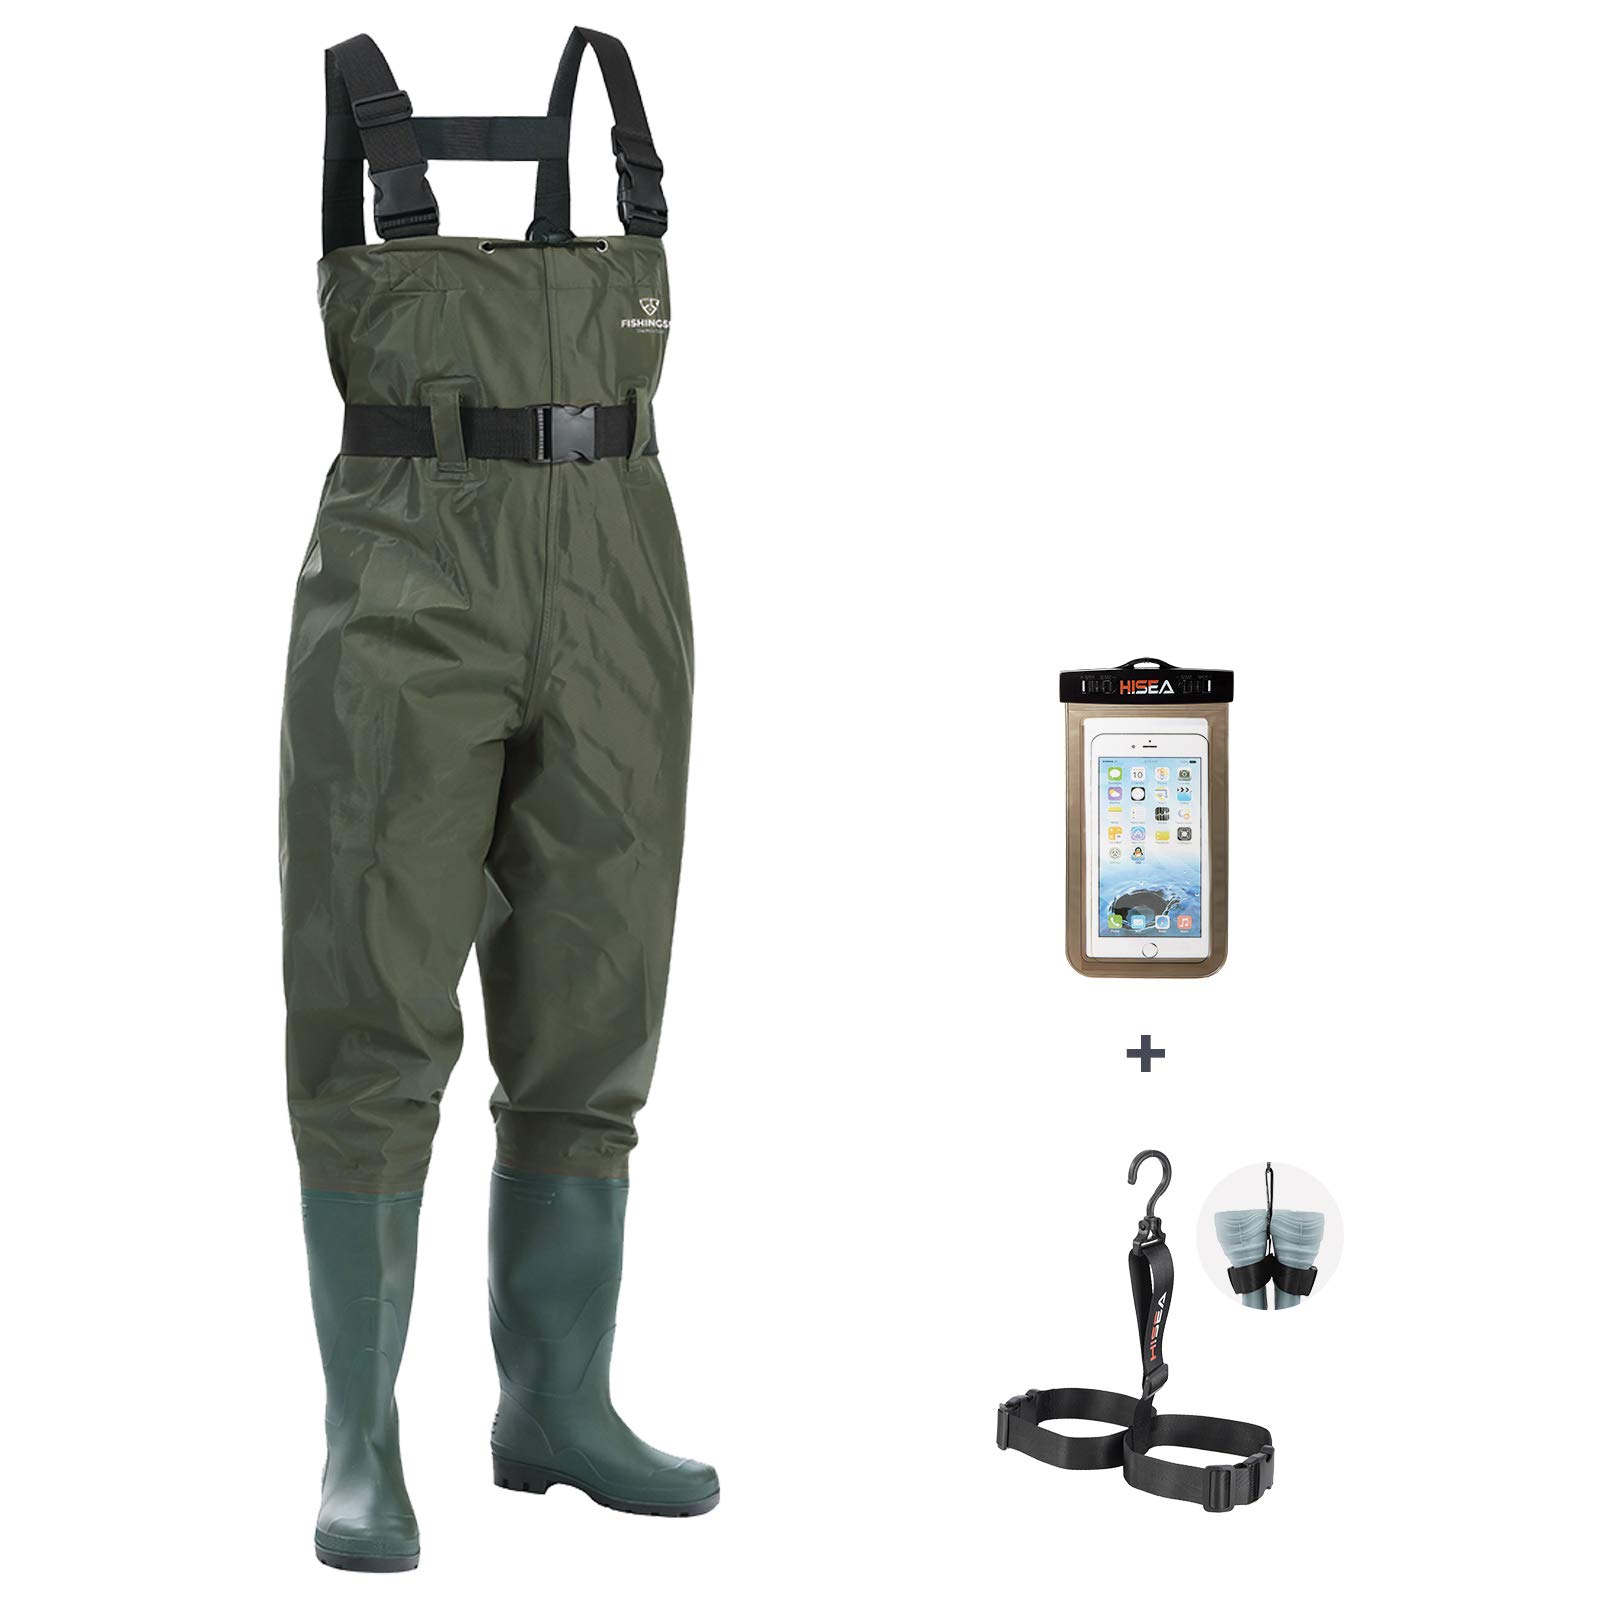 FISHINGSIR HISEA Fishing Waders for Men with Boots Womens Chest